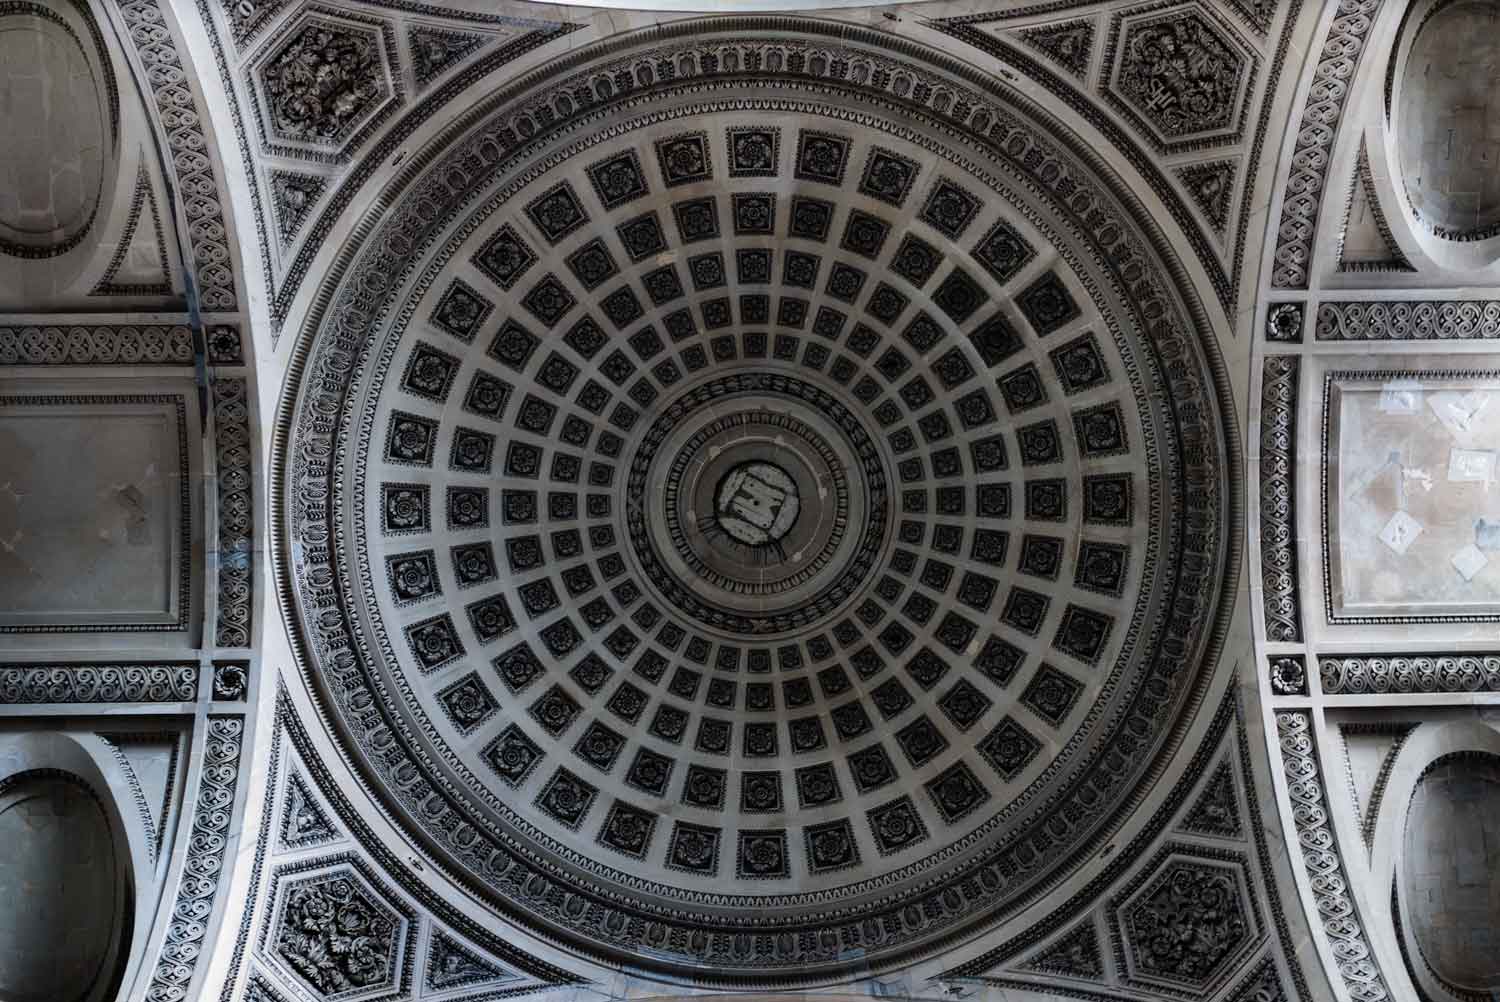 The roof dome where Foucault proved in 1851 that the Earth spun on its axis.